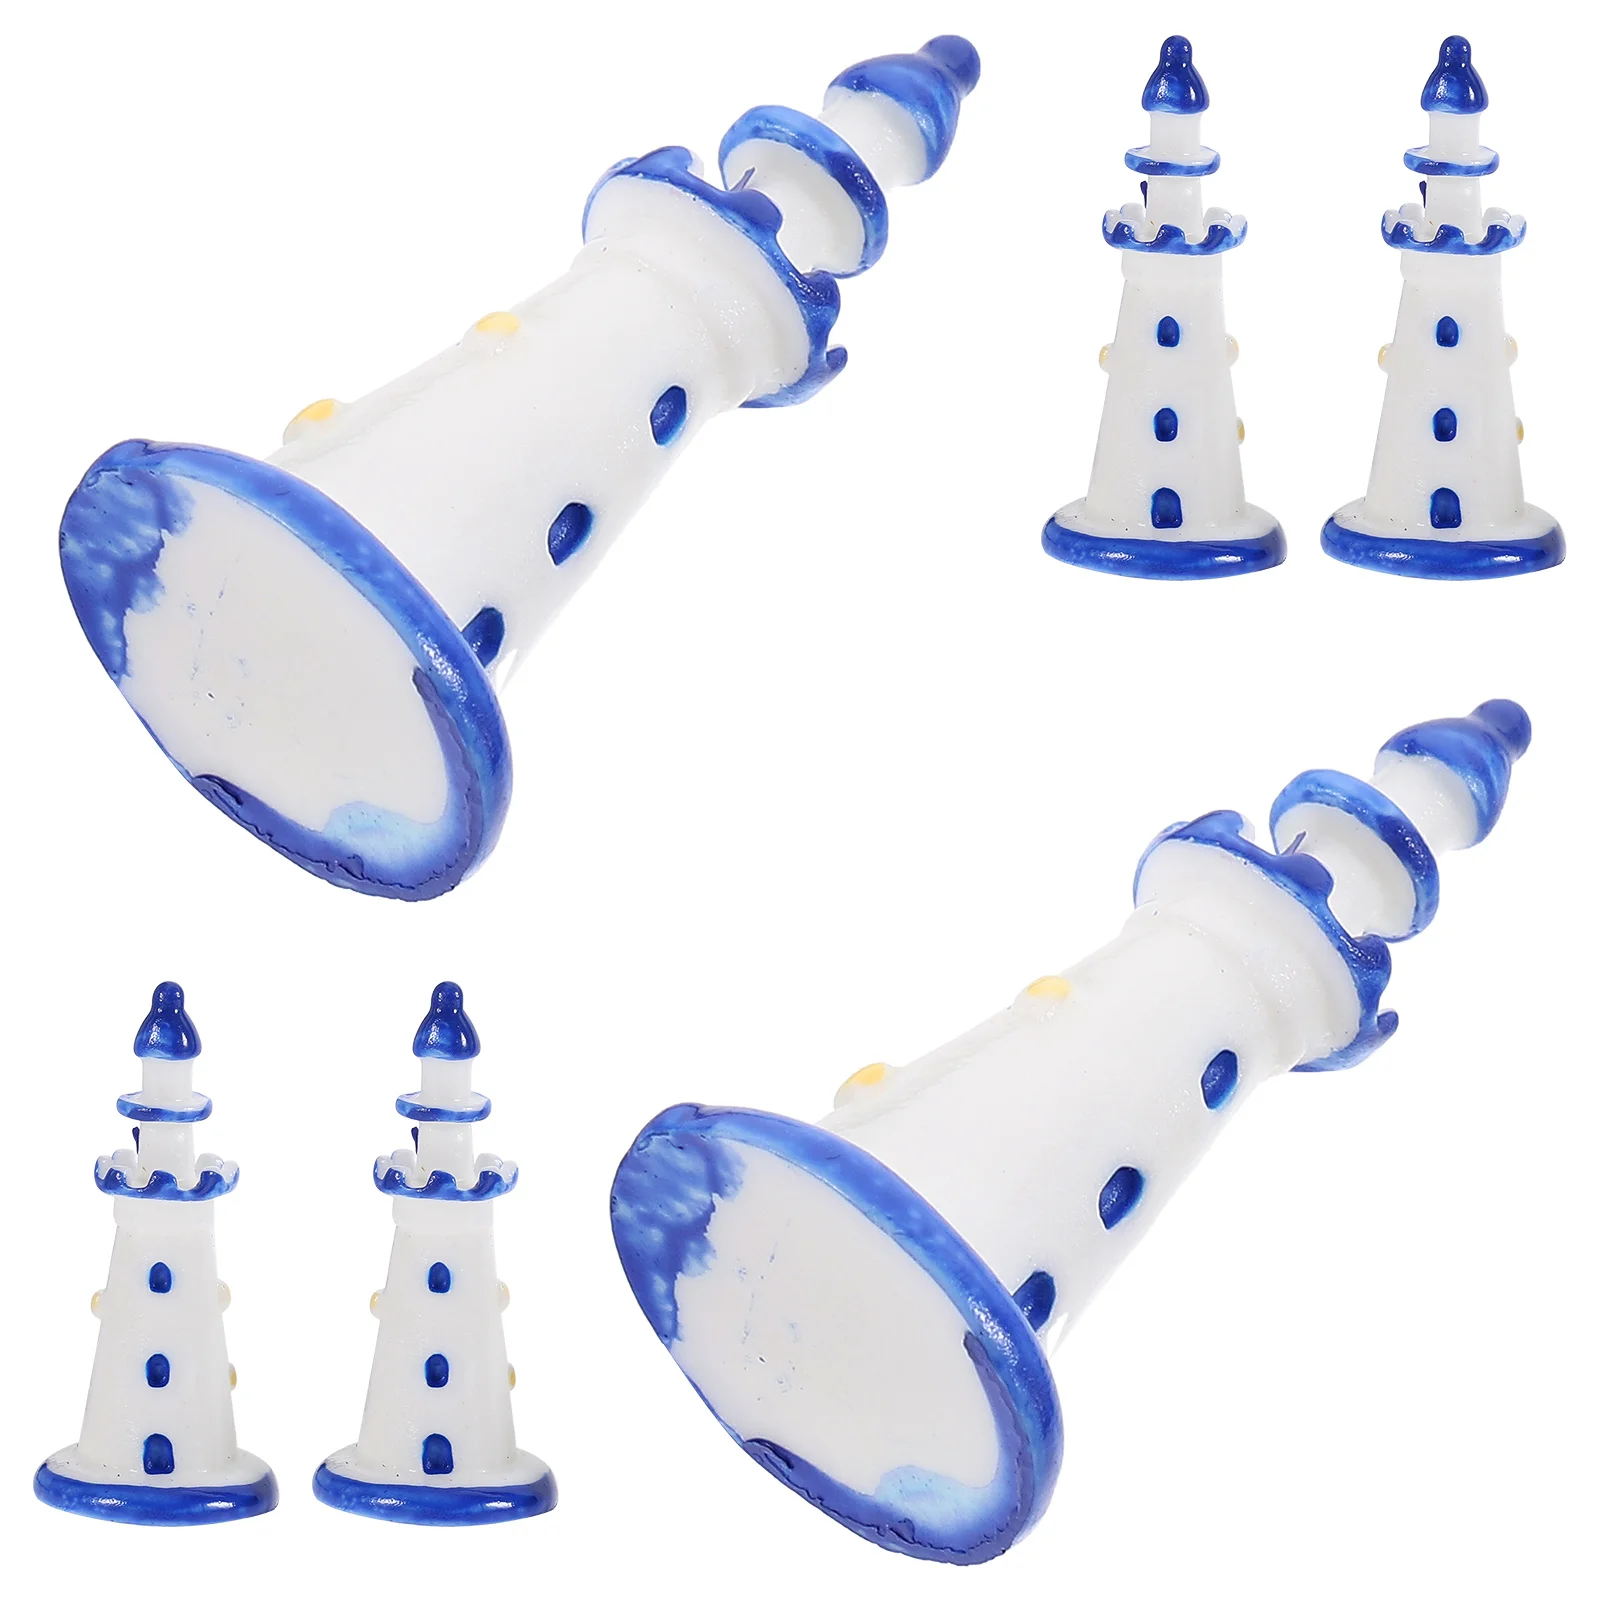 10 Pcs Household Mini Lighthouse Home Decor Scenery Decorations Resin Photography Props newborn baby boys photography props cool rock leather outfits mini drum guitar glasses decorations fotografia studio photo props